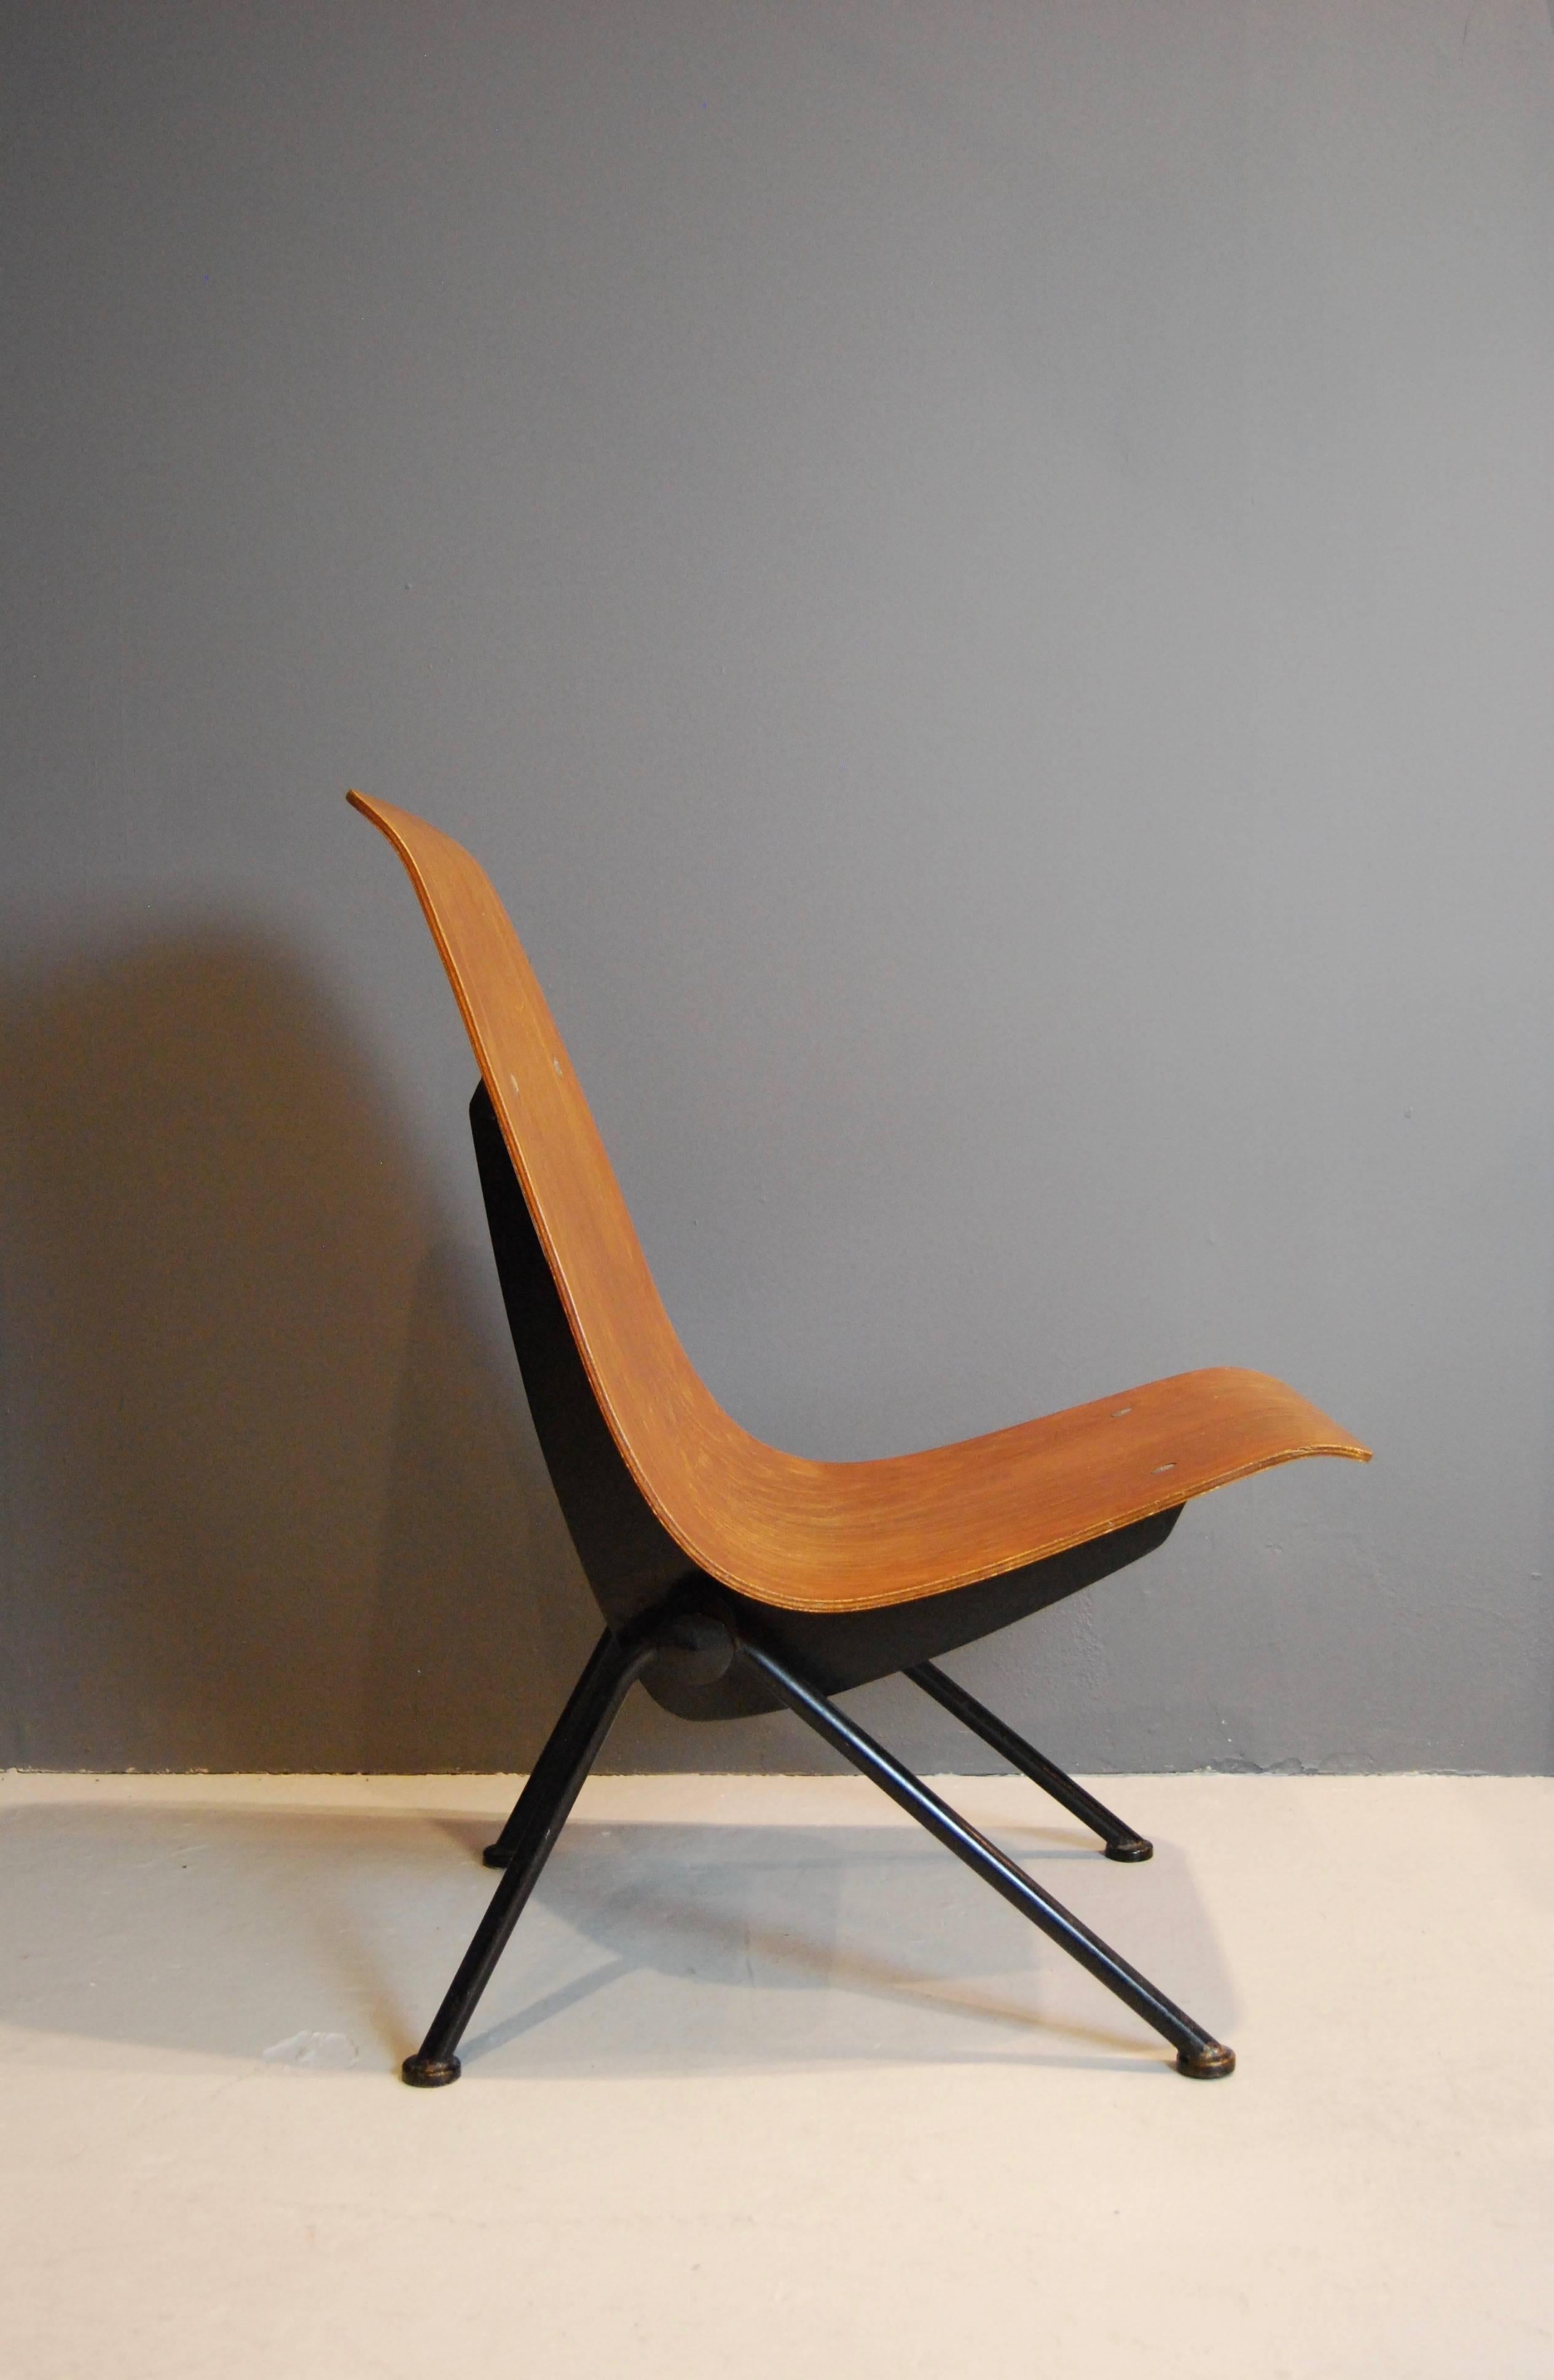 French Antony Chair, Jean Prouve, 1954